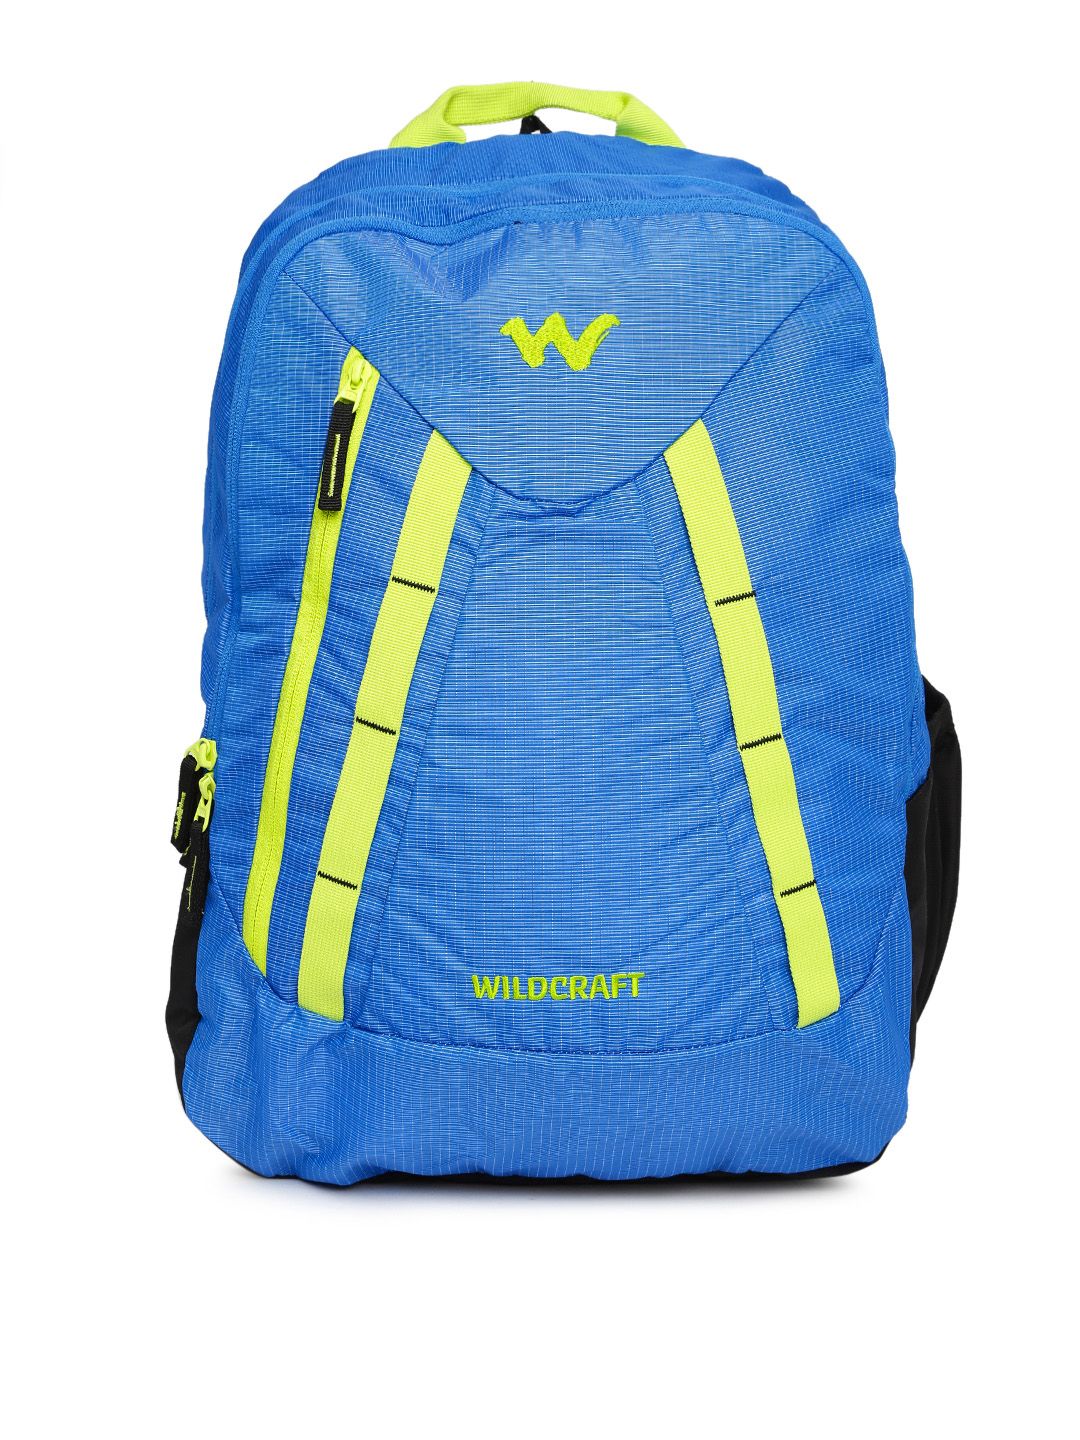 Wildcraft Unisex Blue WC 3 Latlong 3 Backpack Price in India